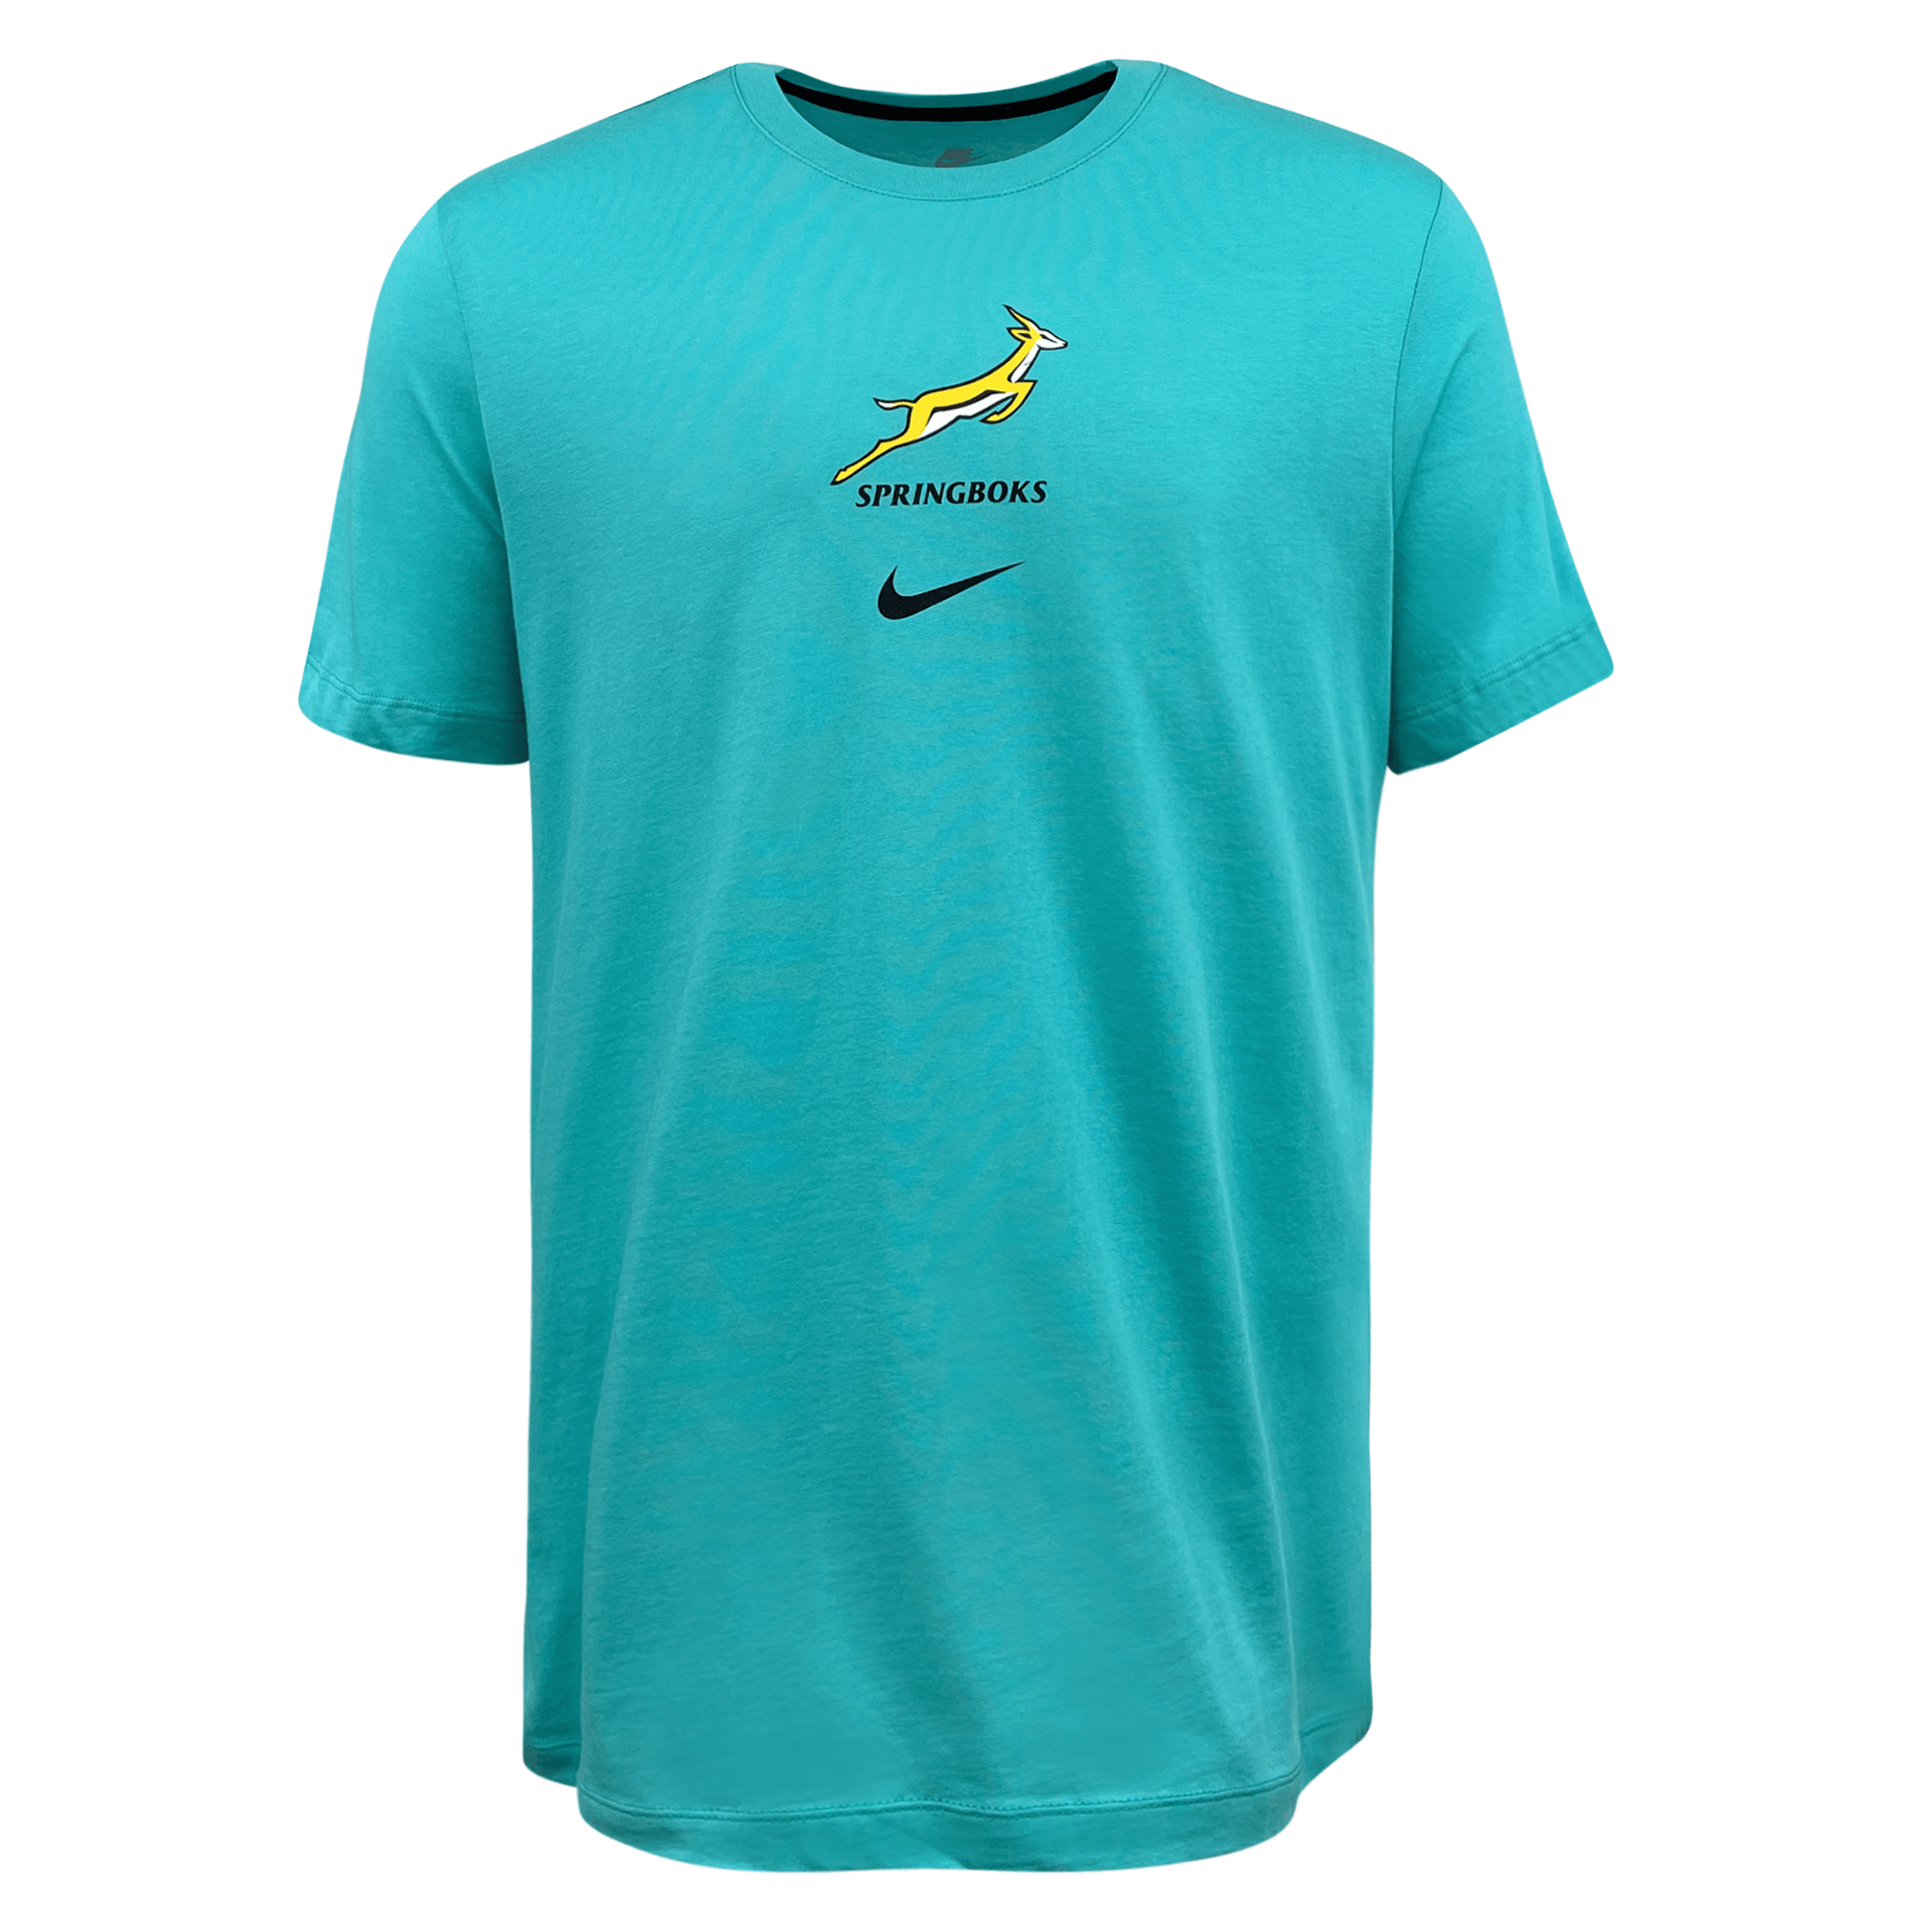 Springboks Rugby Unity T-shirt 23/24 by Nike | World Rugby Shop